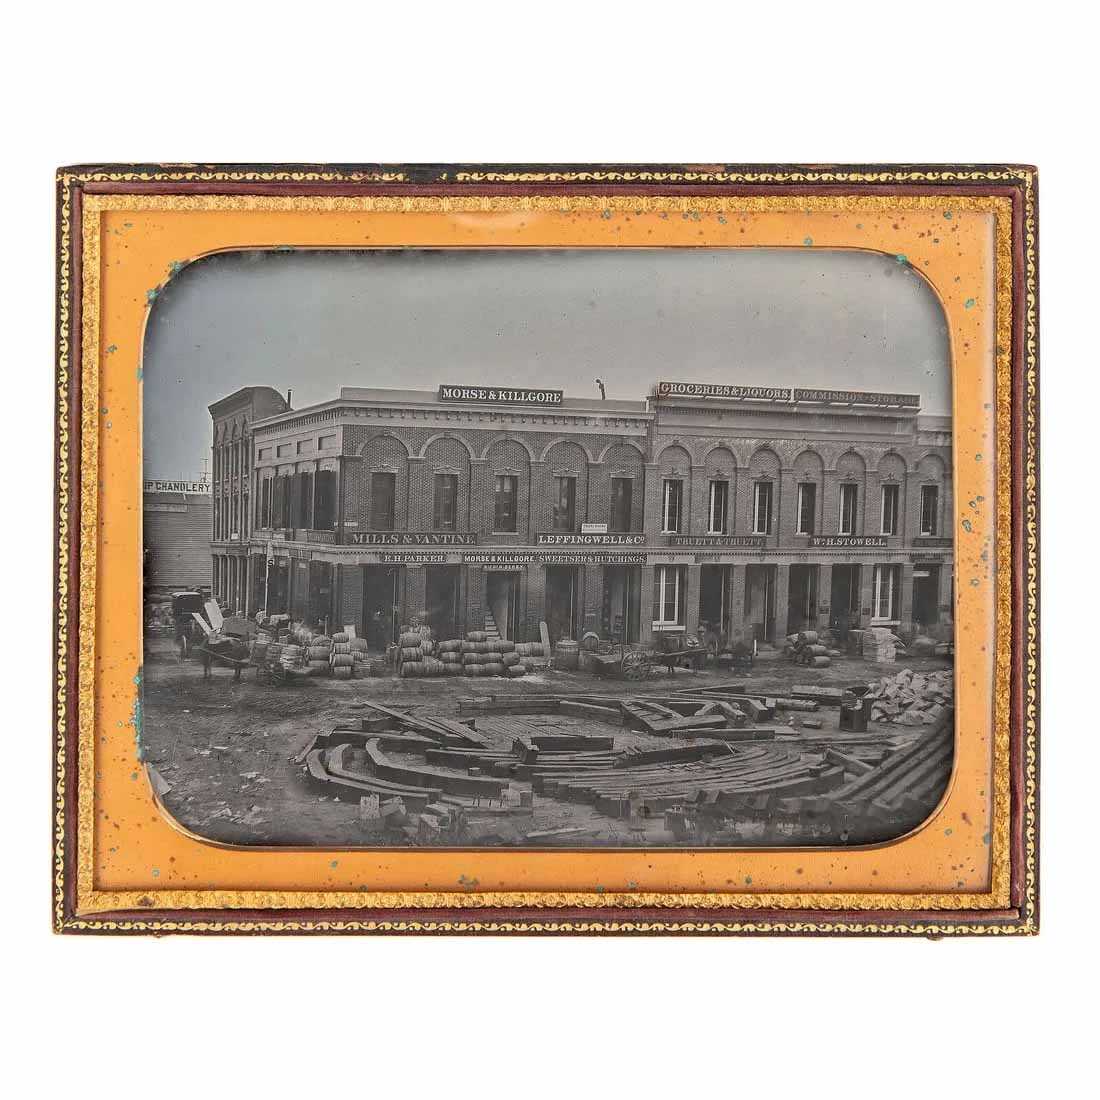 Daguerreotype of the southeast corner of Front and Sacramento Streets in San Francisco circa 1852-1853, estimated at $30,000-$50,000 at Freeman's Hindman.